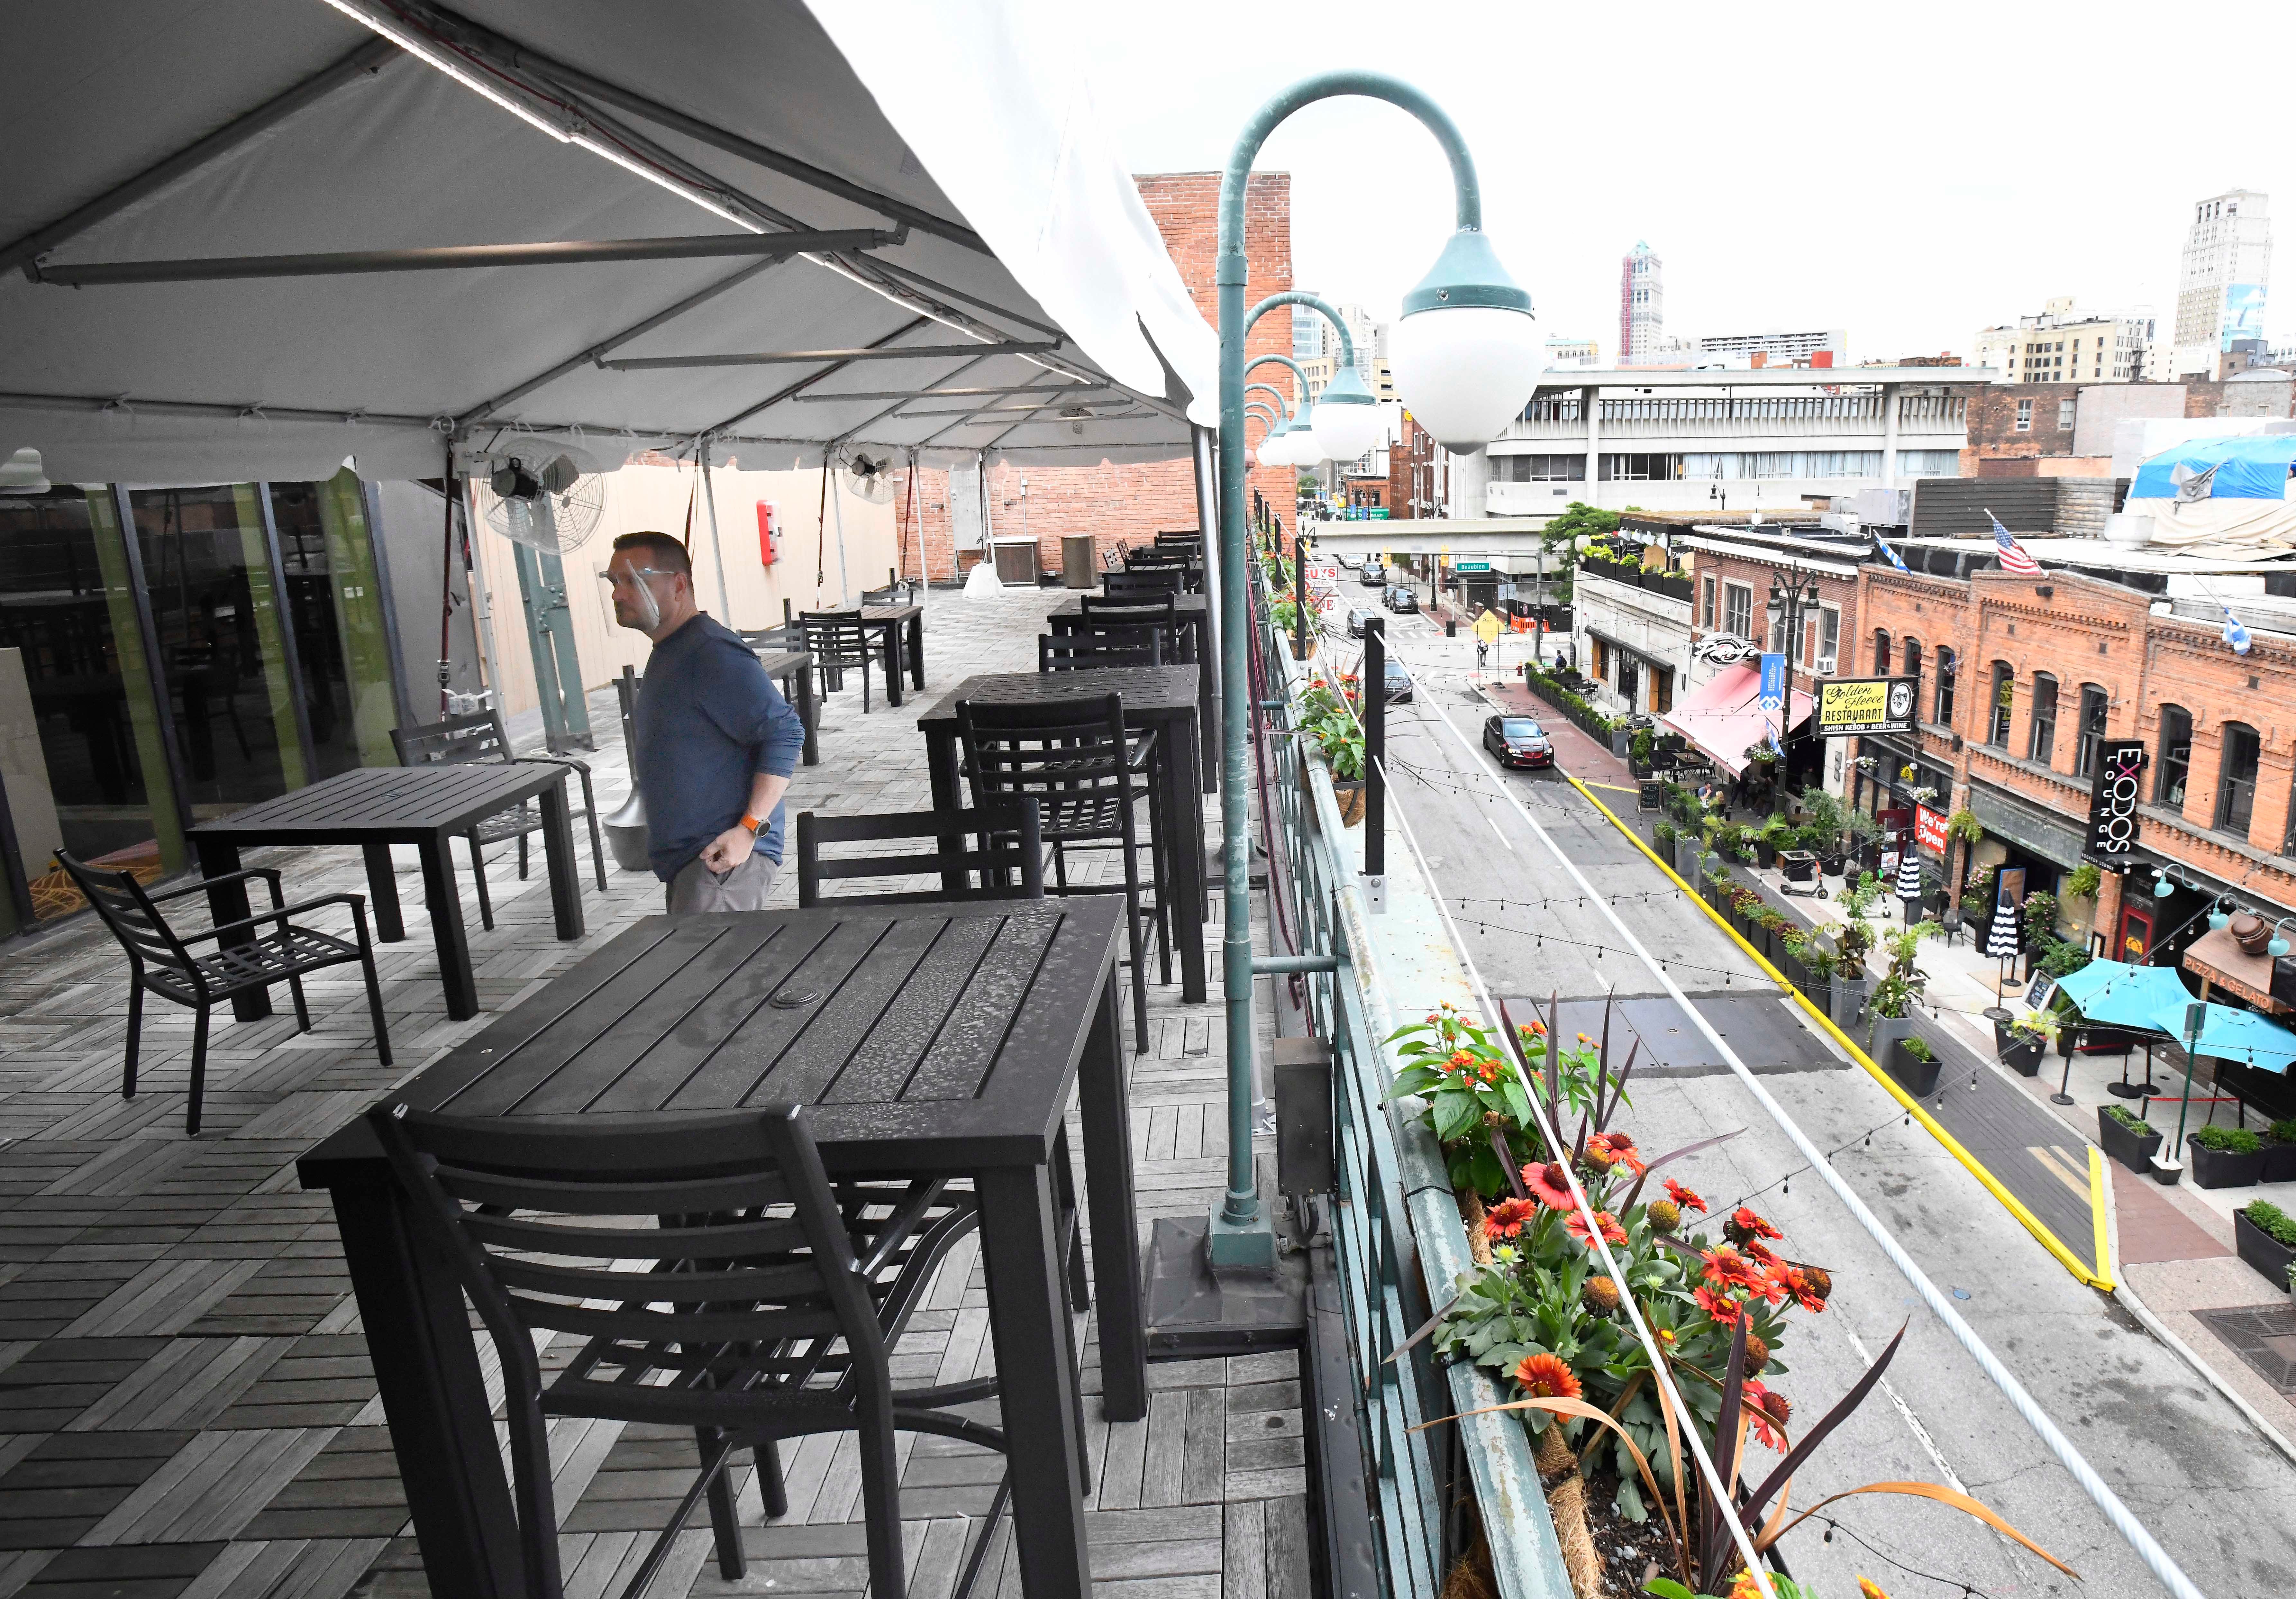 With smoking in the casino not allowed, Greektown Casino opened an outside smoking patio overlooking Monroe Street.  Besides no indoor smoking, other services closed at Greektown Casino are the hotel, valet, poker as well as no self-serve beverage stations.